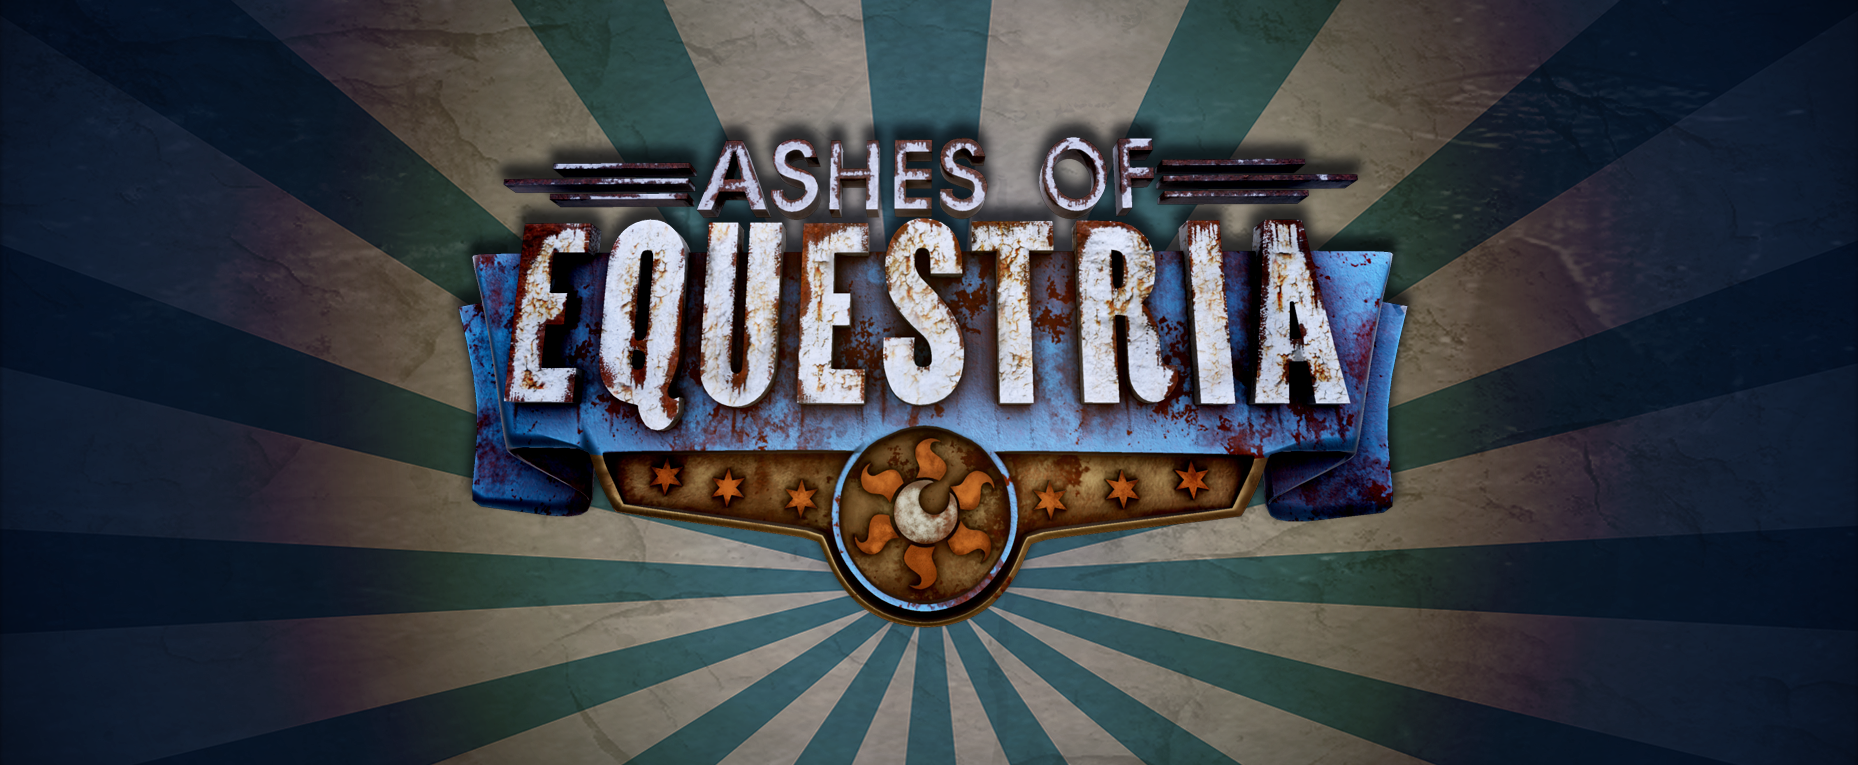 Ashes of Equestria 小马国余烬-EquestriaMemory